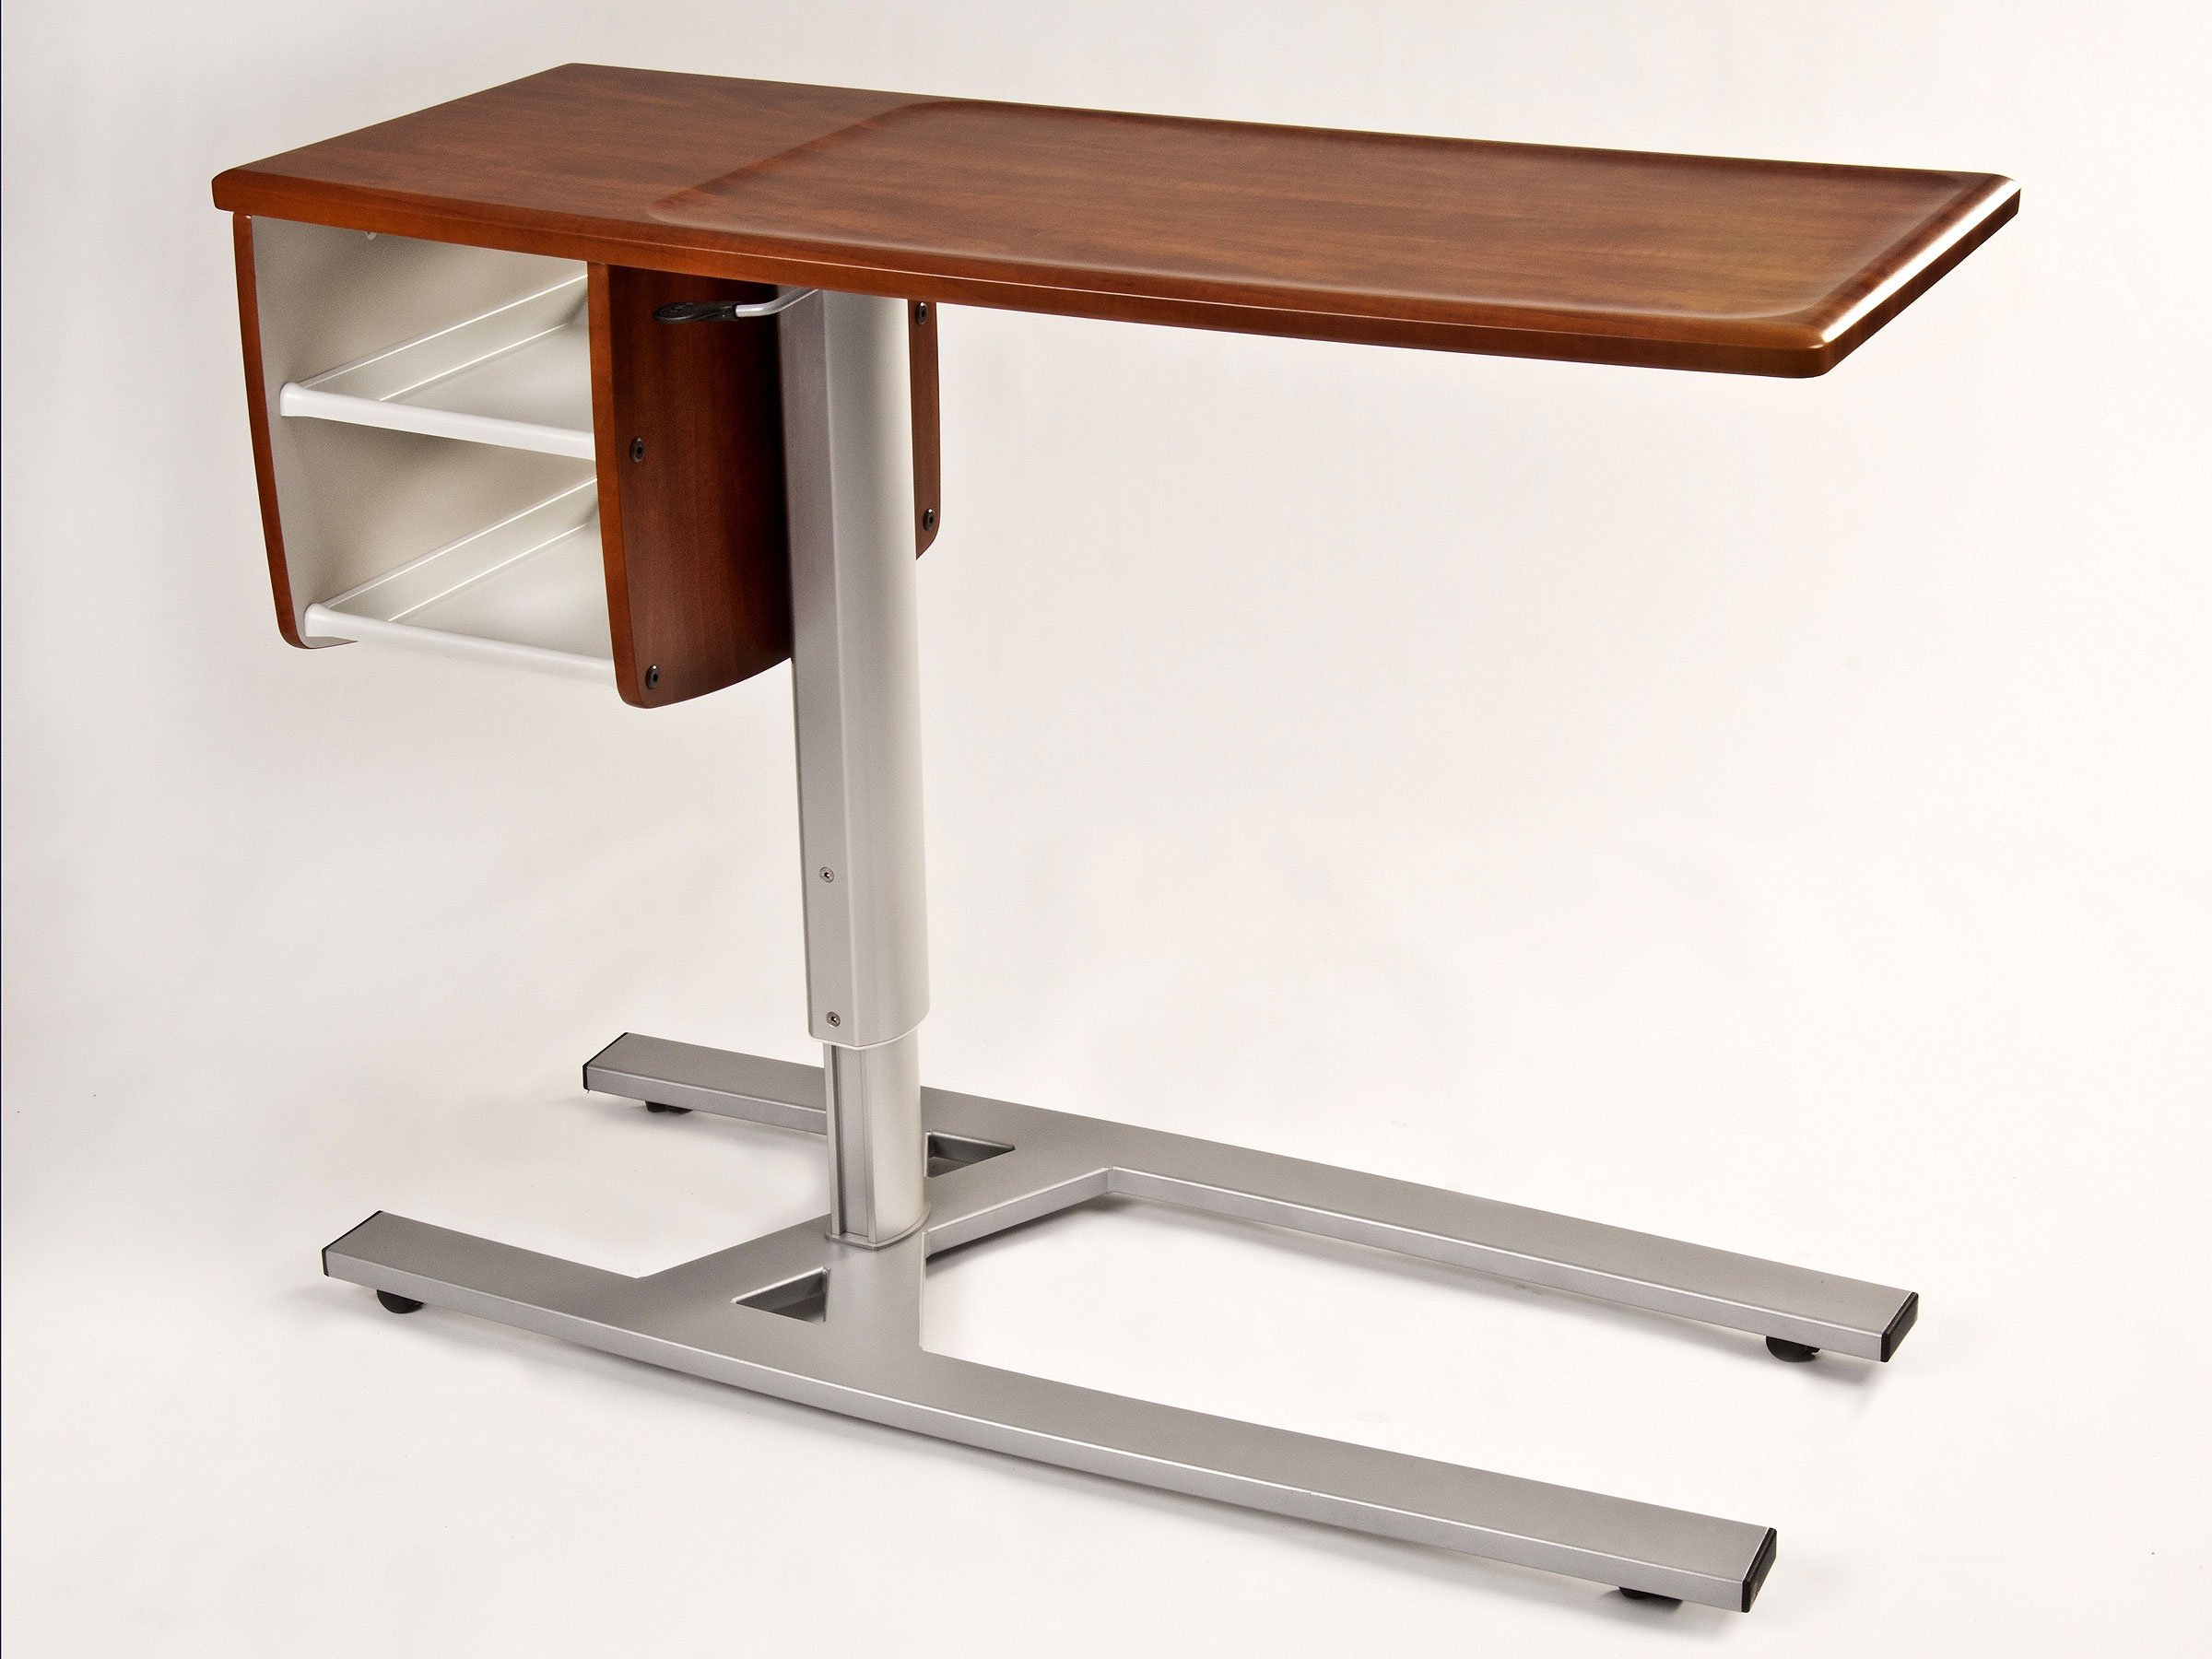 Over The Bed Modern Hospital Tray Table With Wooden Top And ...